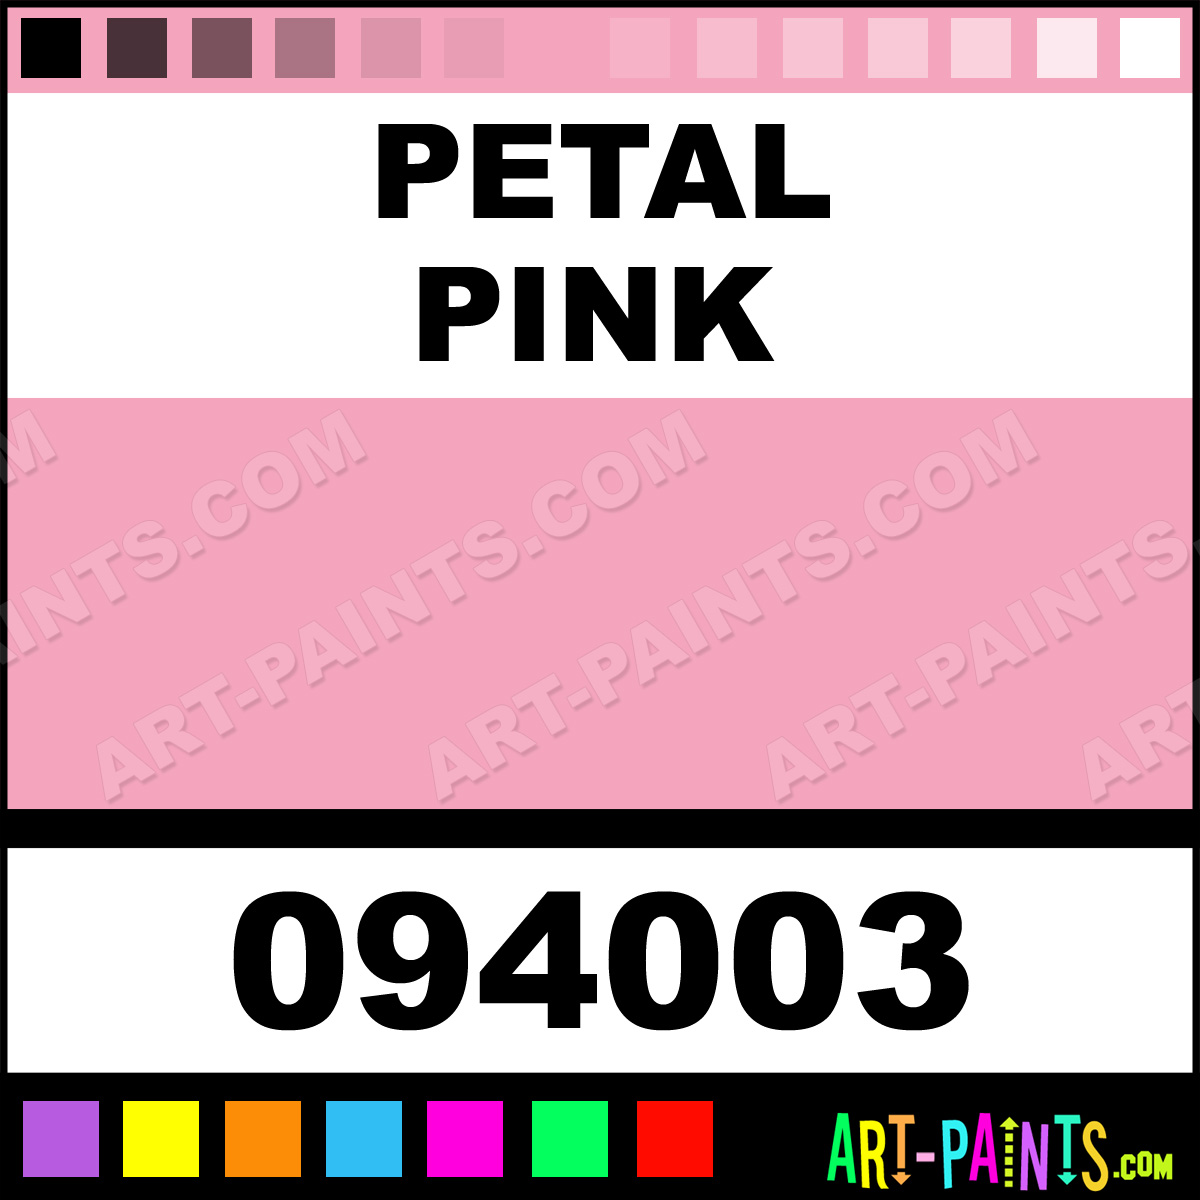 Petal Pink Acrylic Paint, Stenciling Supplies